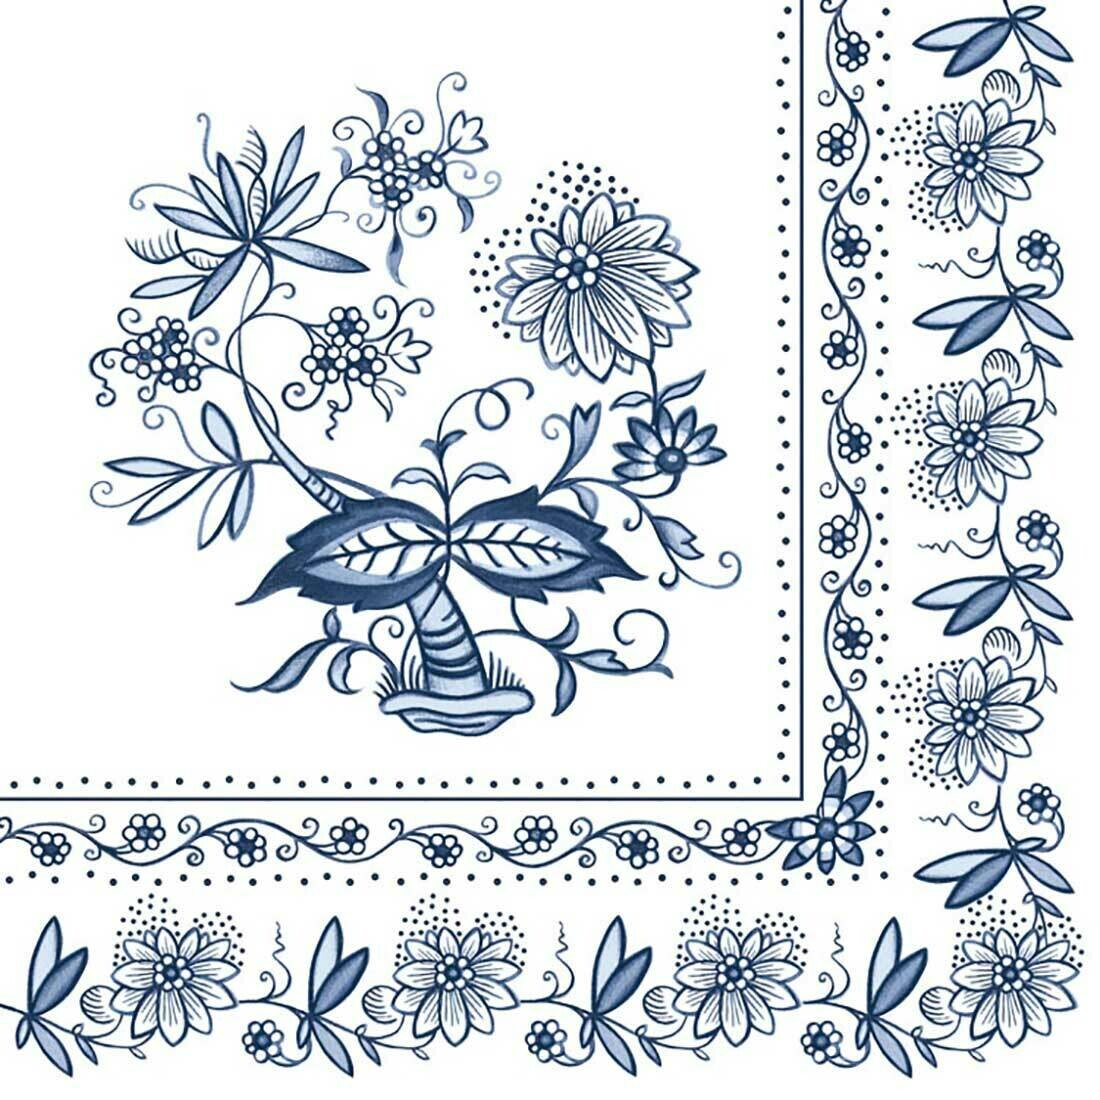 Decoupage Paper Napkins - Floral - Blue Onion (1 Sheet) Out of Stock